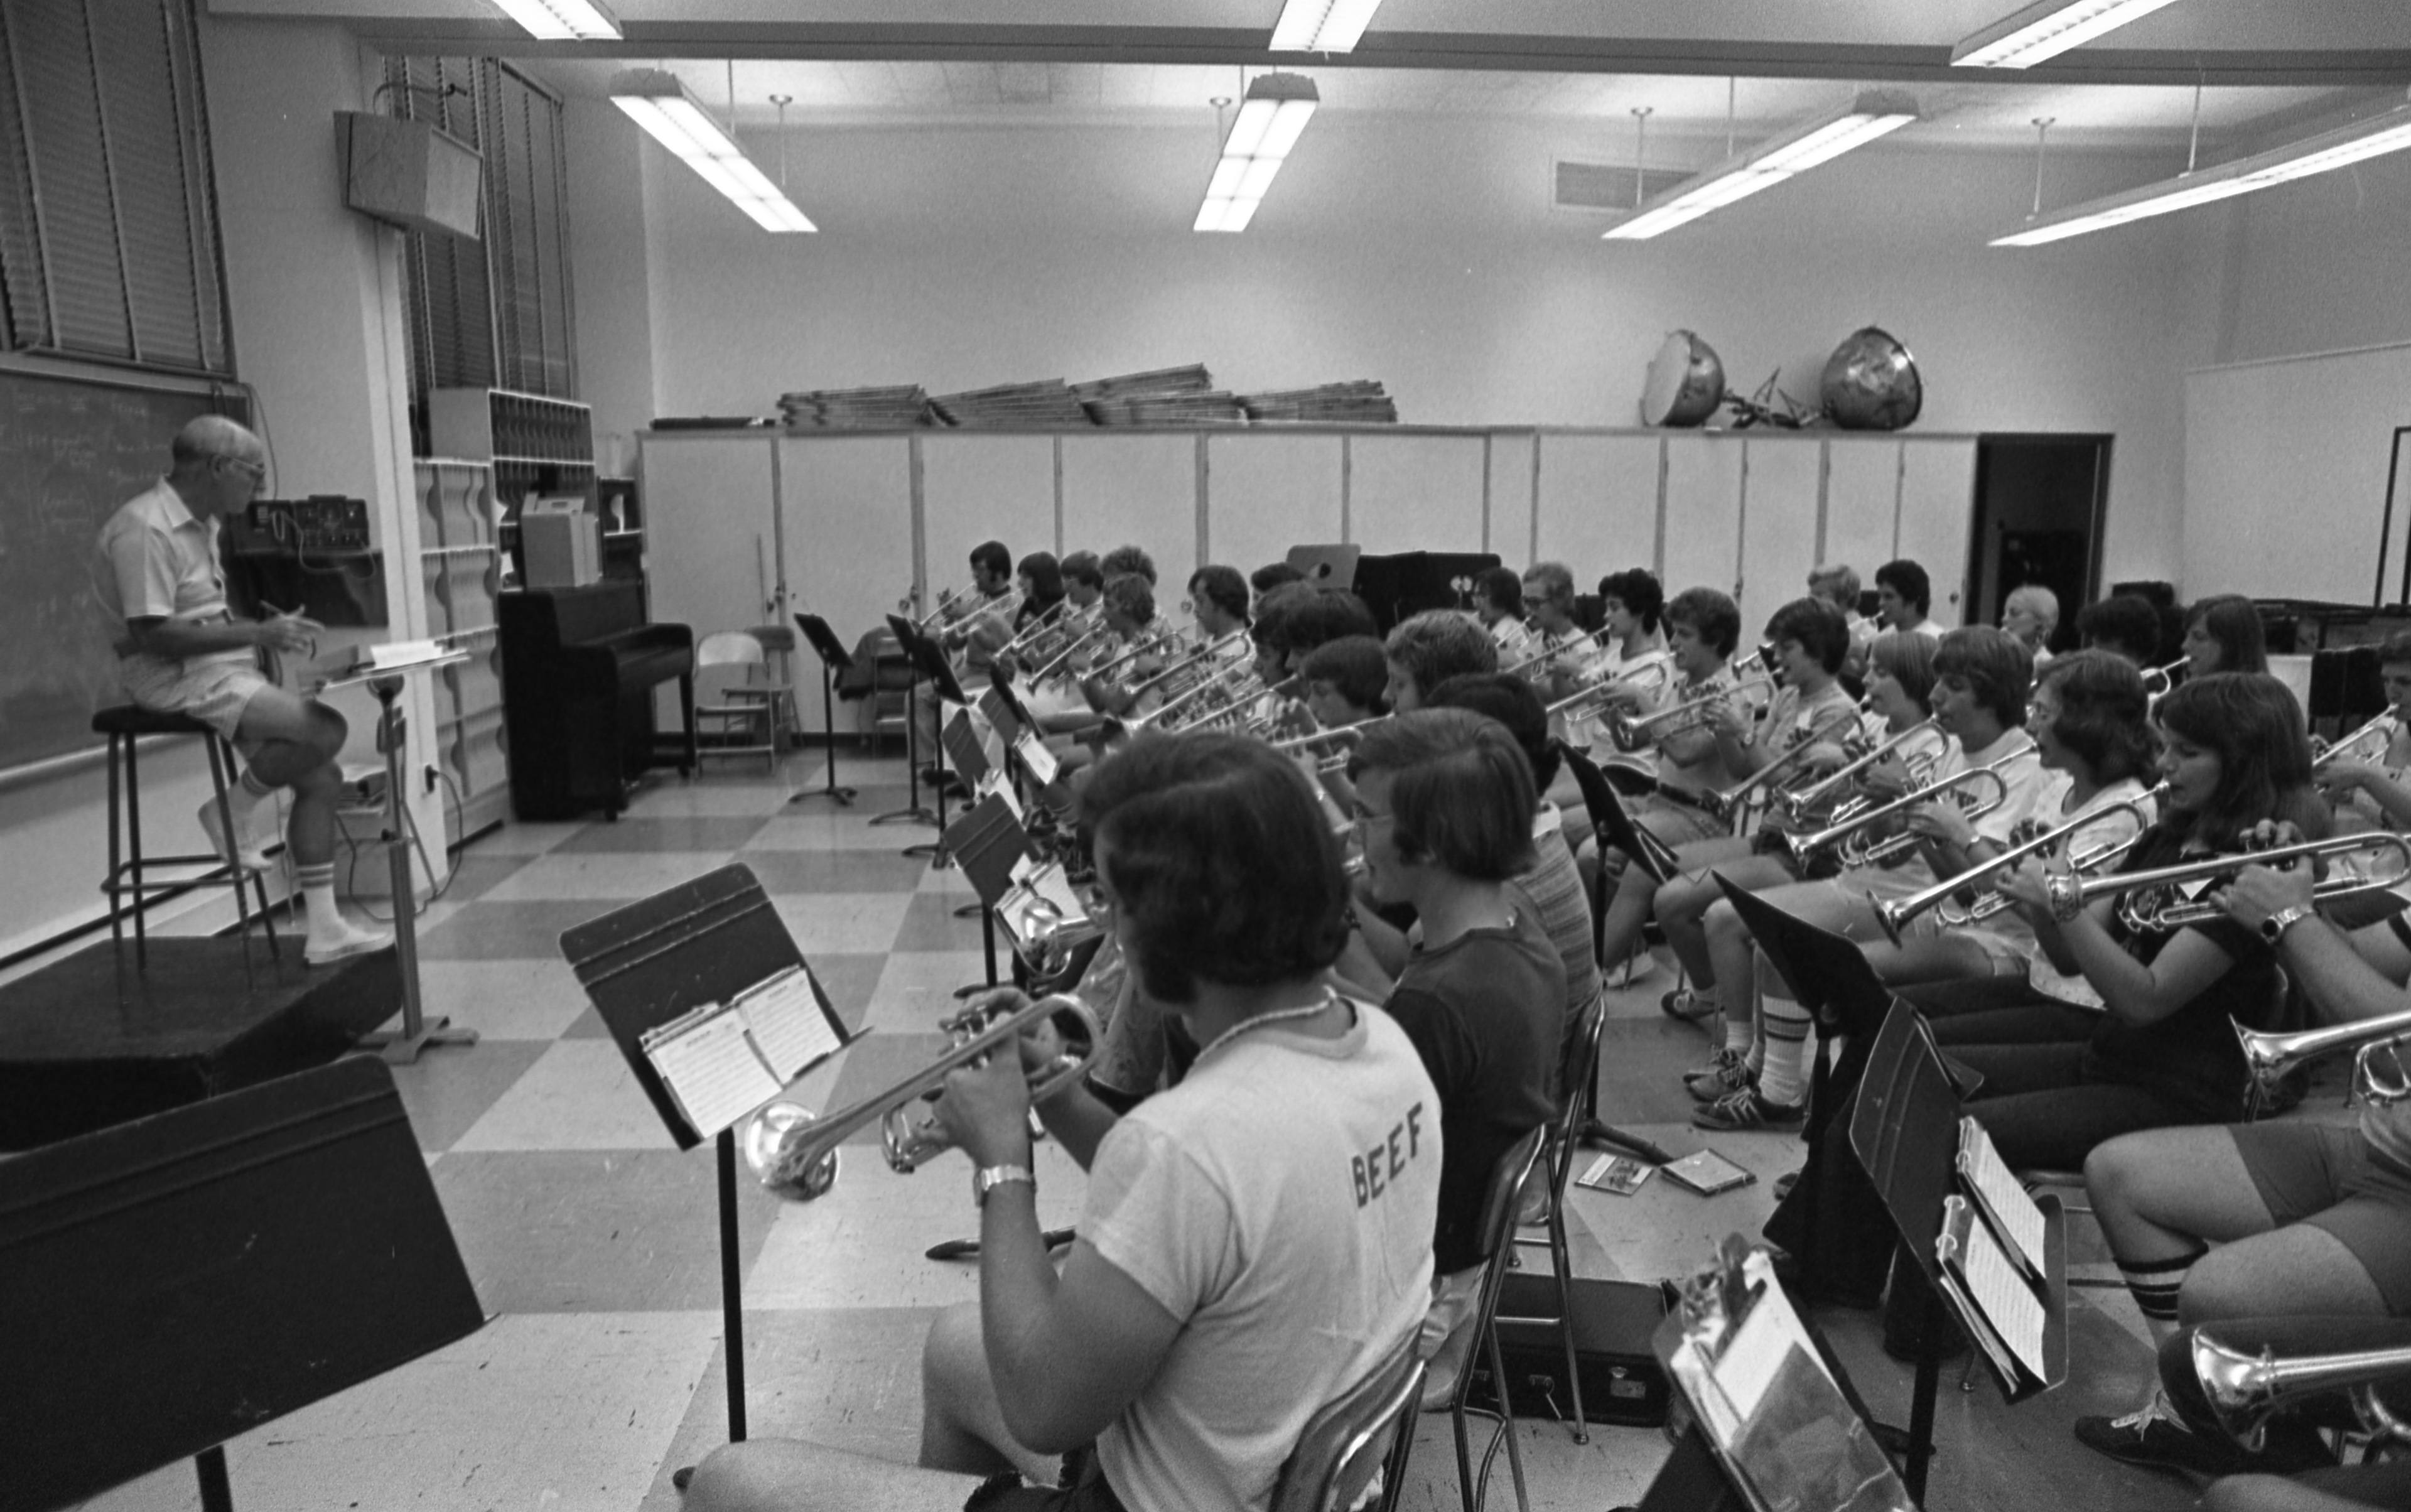 Band director Mark Kelly sits on a stool in front of a room full of trumpet players as they rehearse.